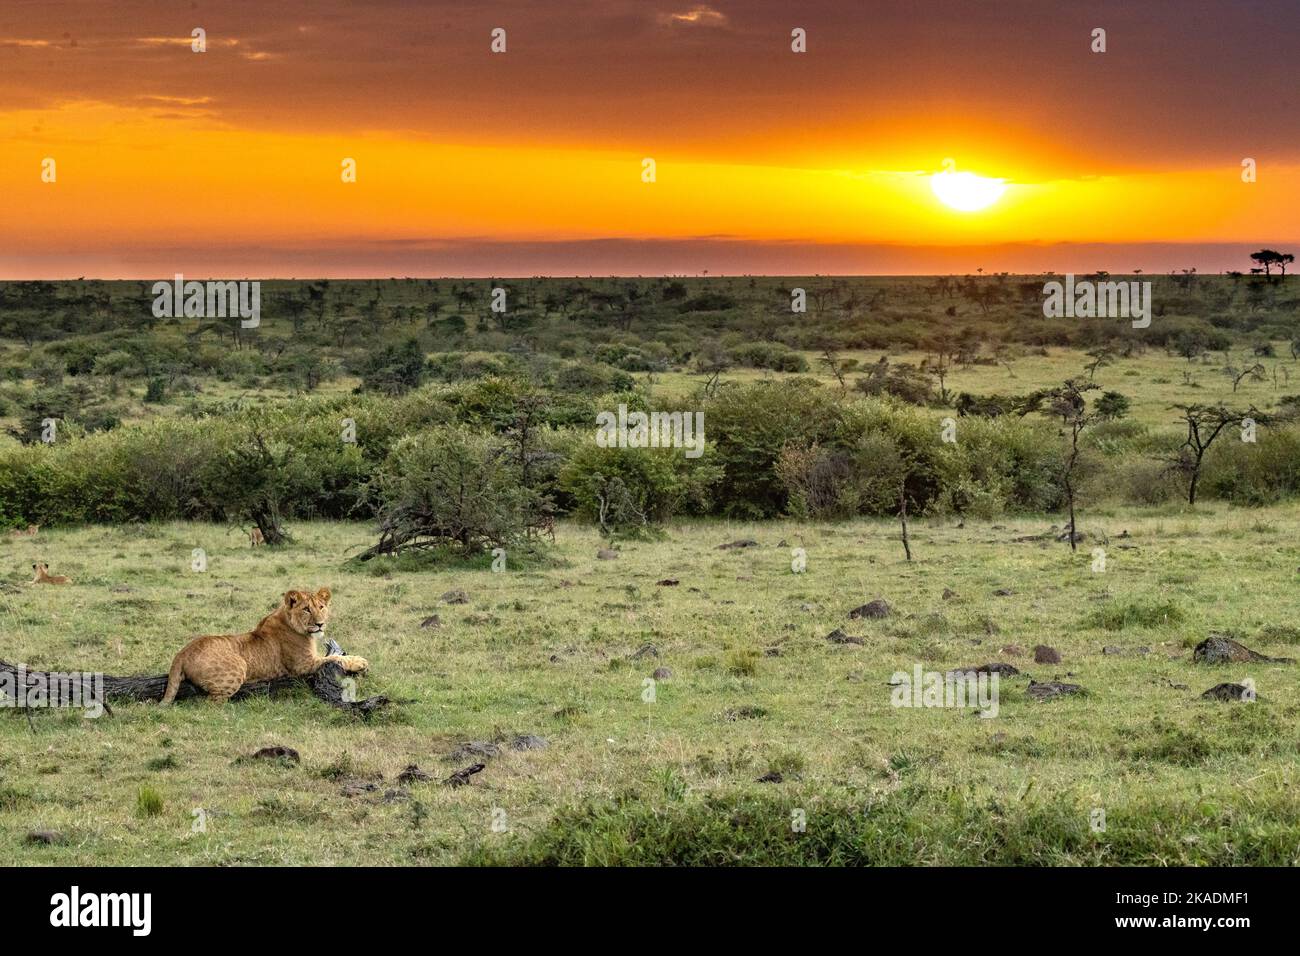 An African lion gazing out over the field, photo taken on a safari in Serengeti Stock Photo